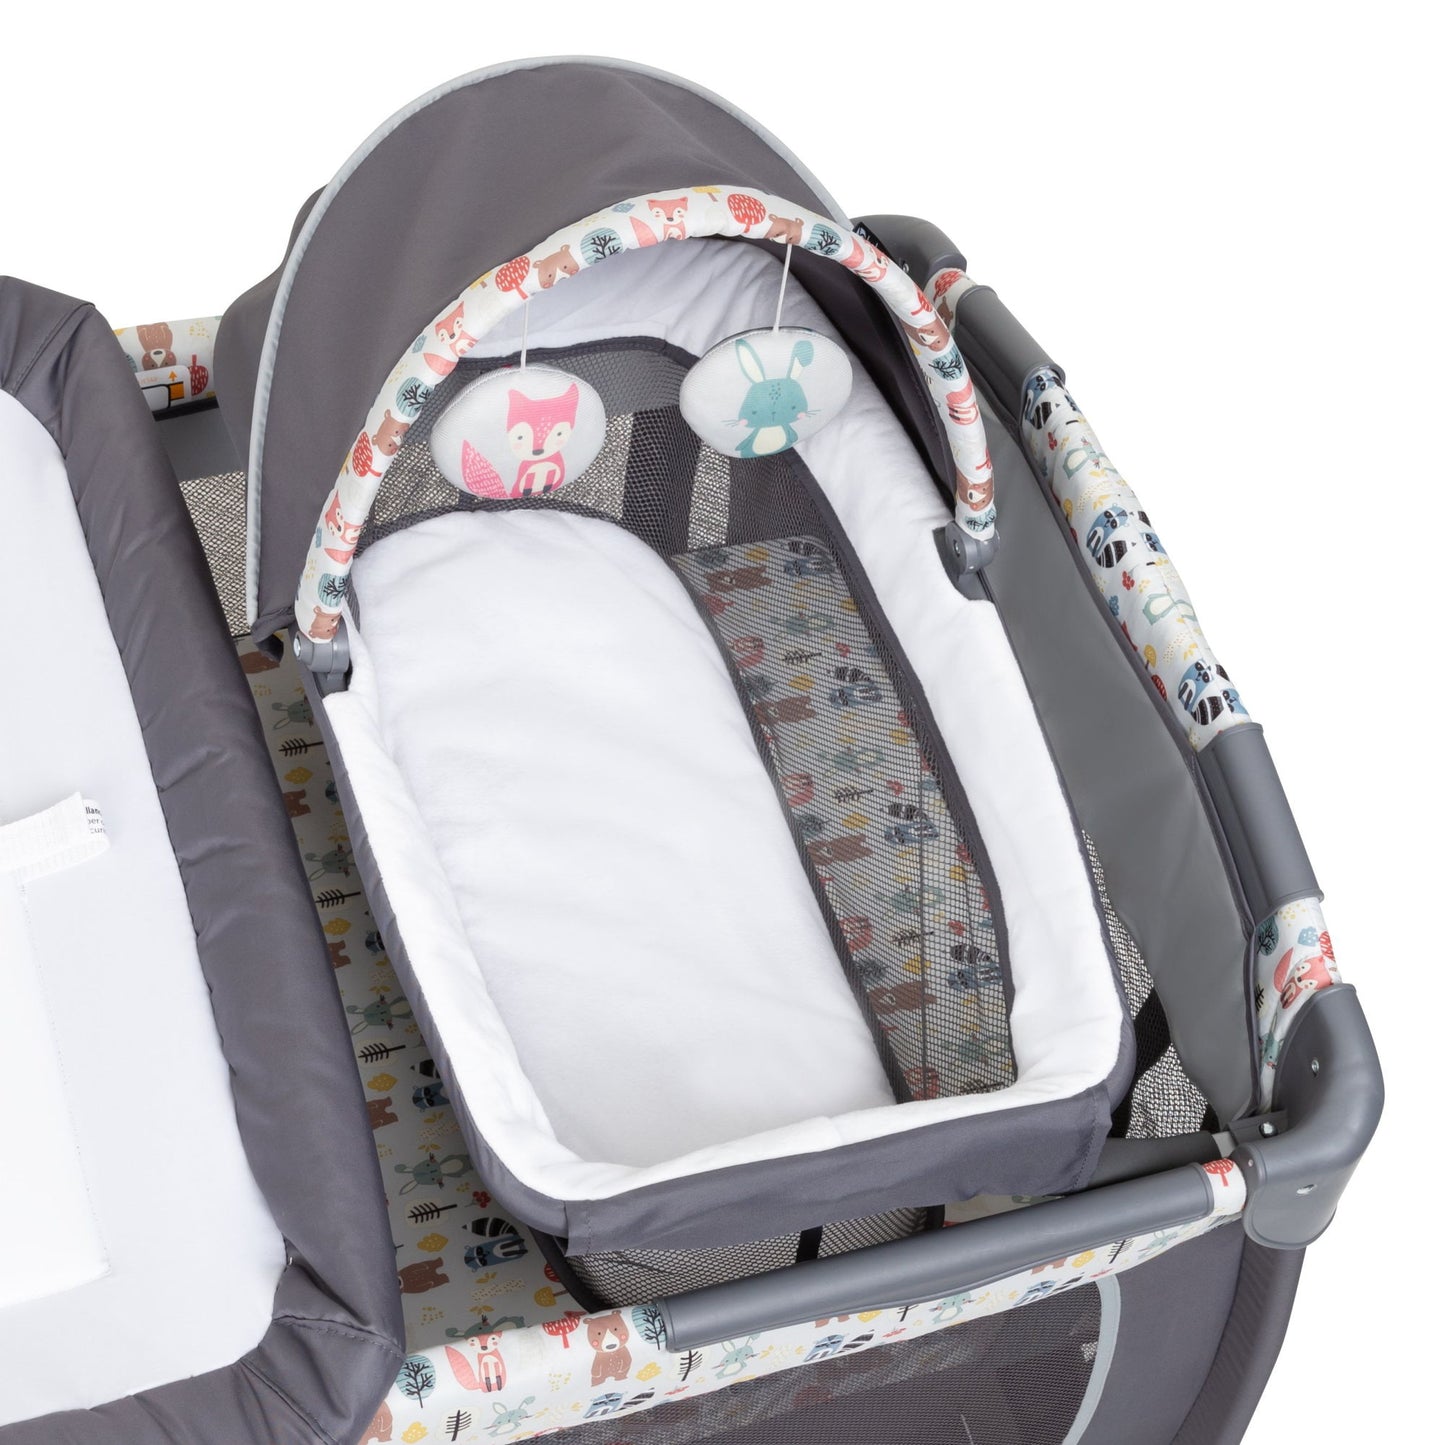 Lil Snooze Deluxe II Nursery Center Playard - Forest Party Gray